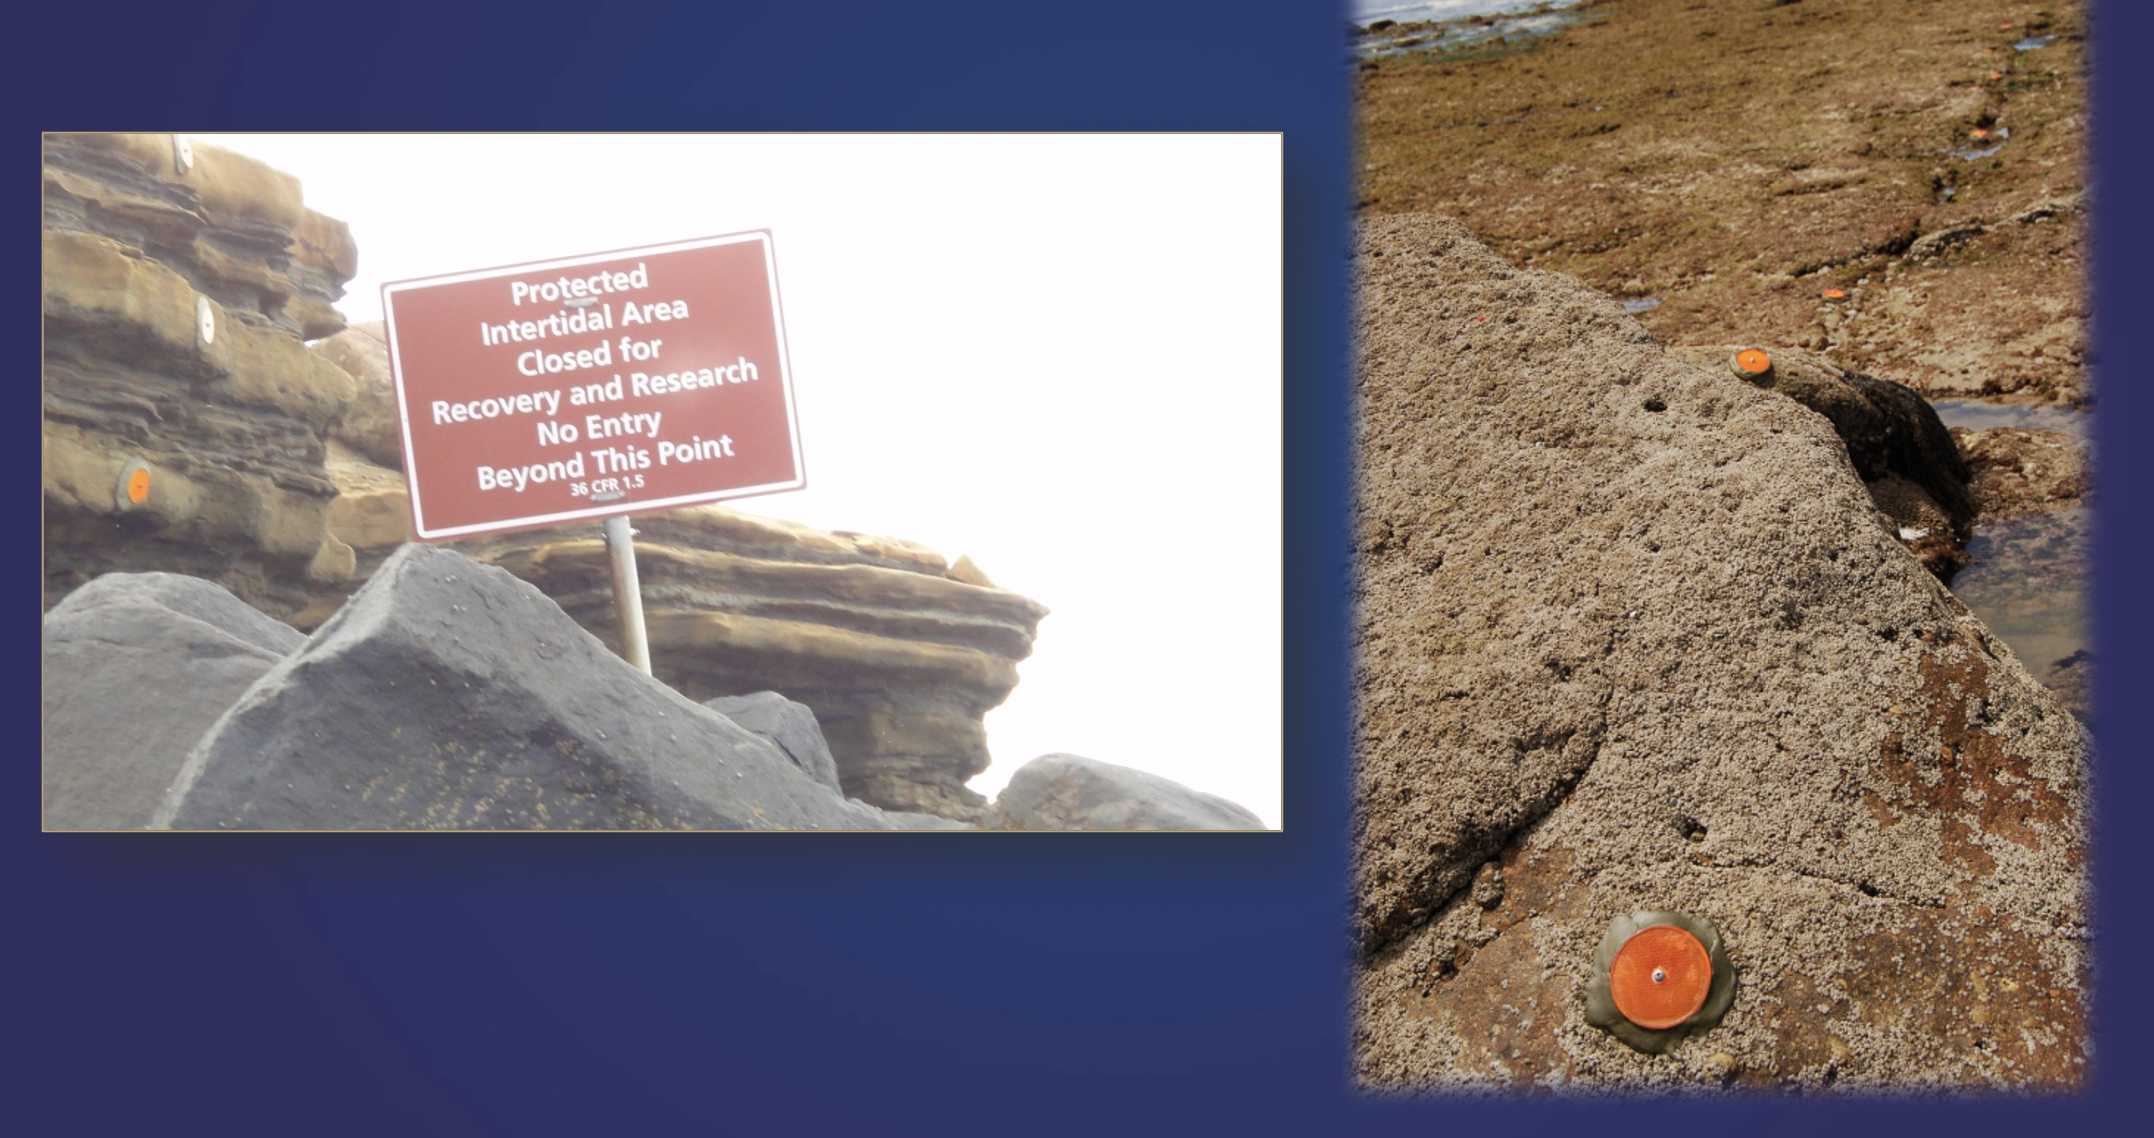 Two images, one showing a brown sign attached to rocks , and the other showing an orange reflective dot glued to the rock.